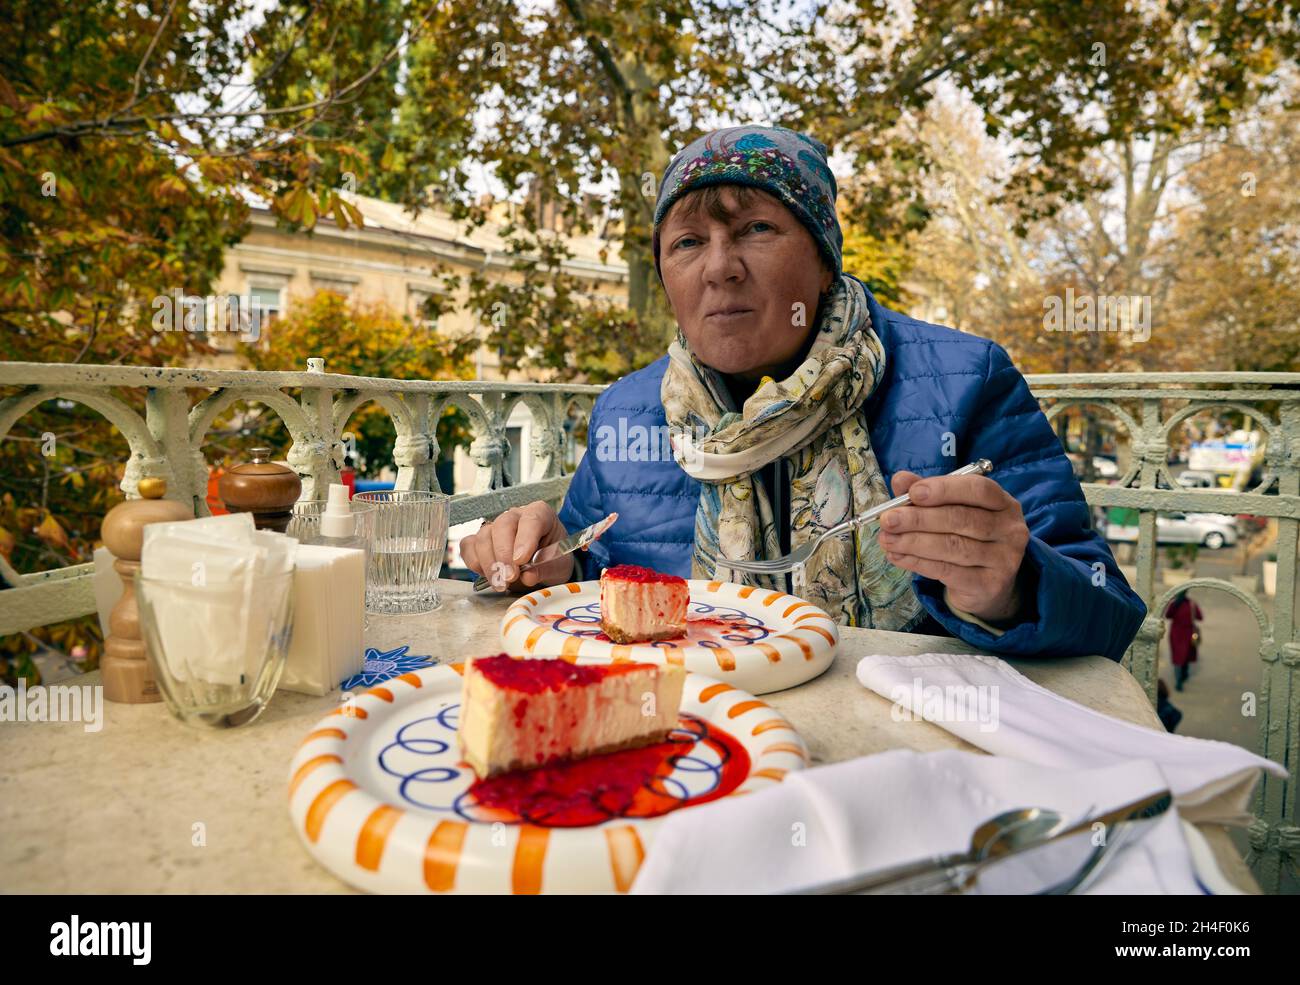 Beautiful mature adult woman eating chees cake at a restaurant table on the balcony with autumn trees in the background. Stock Photo